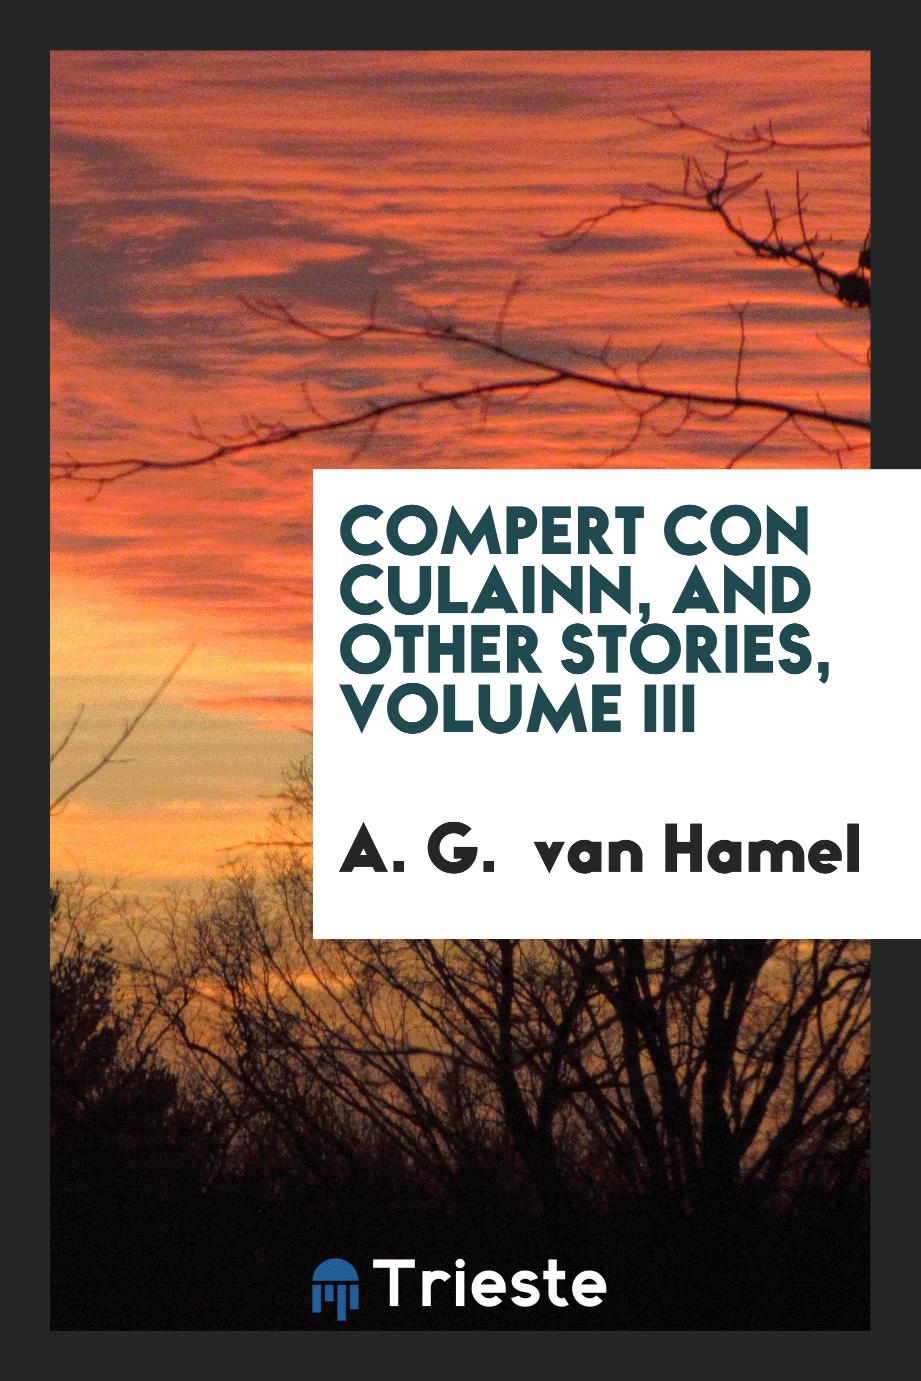 Compert Con Culainn, and other stories, Volume III